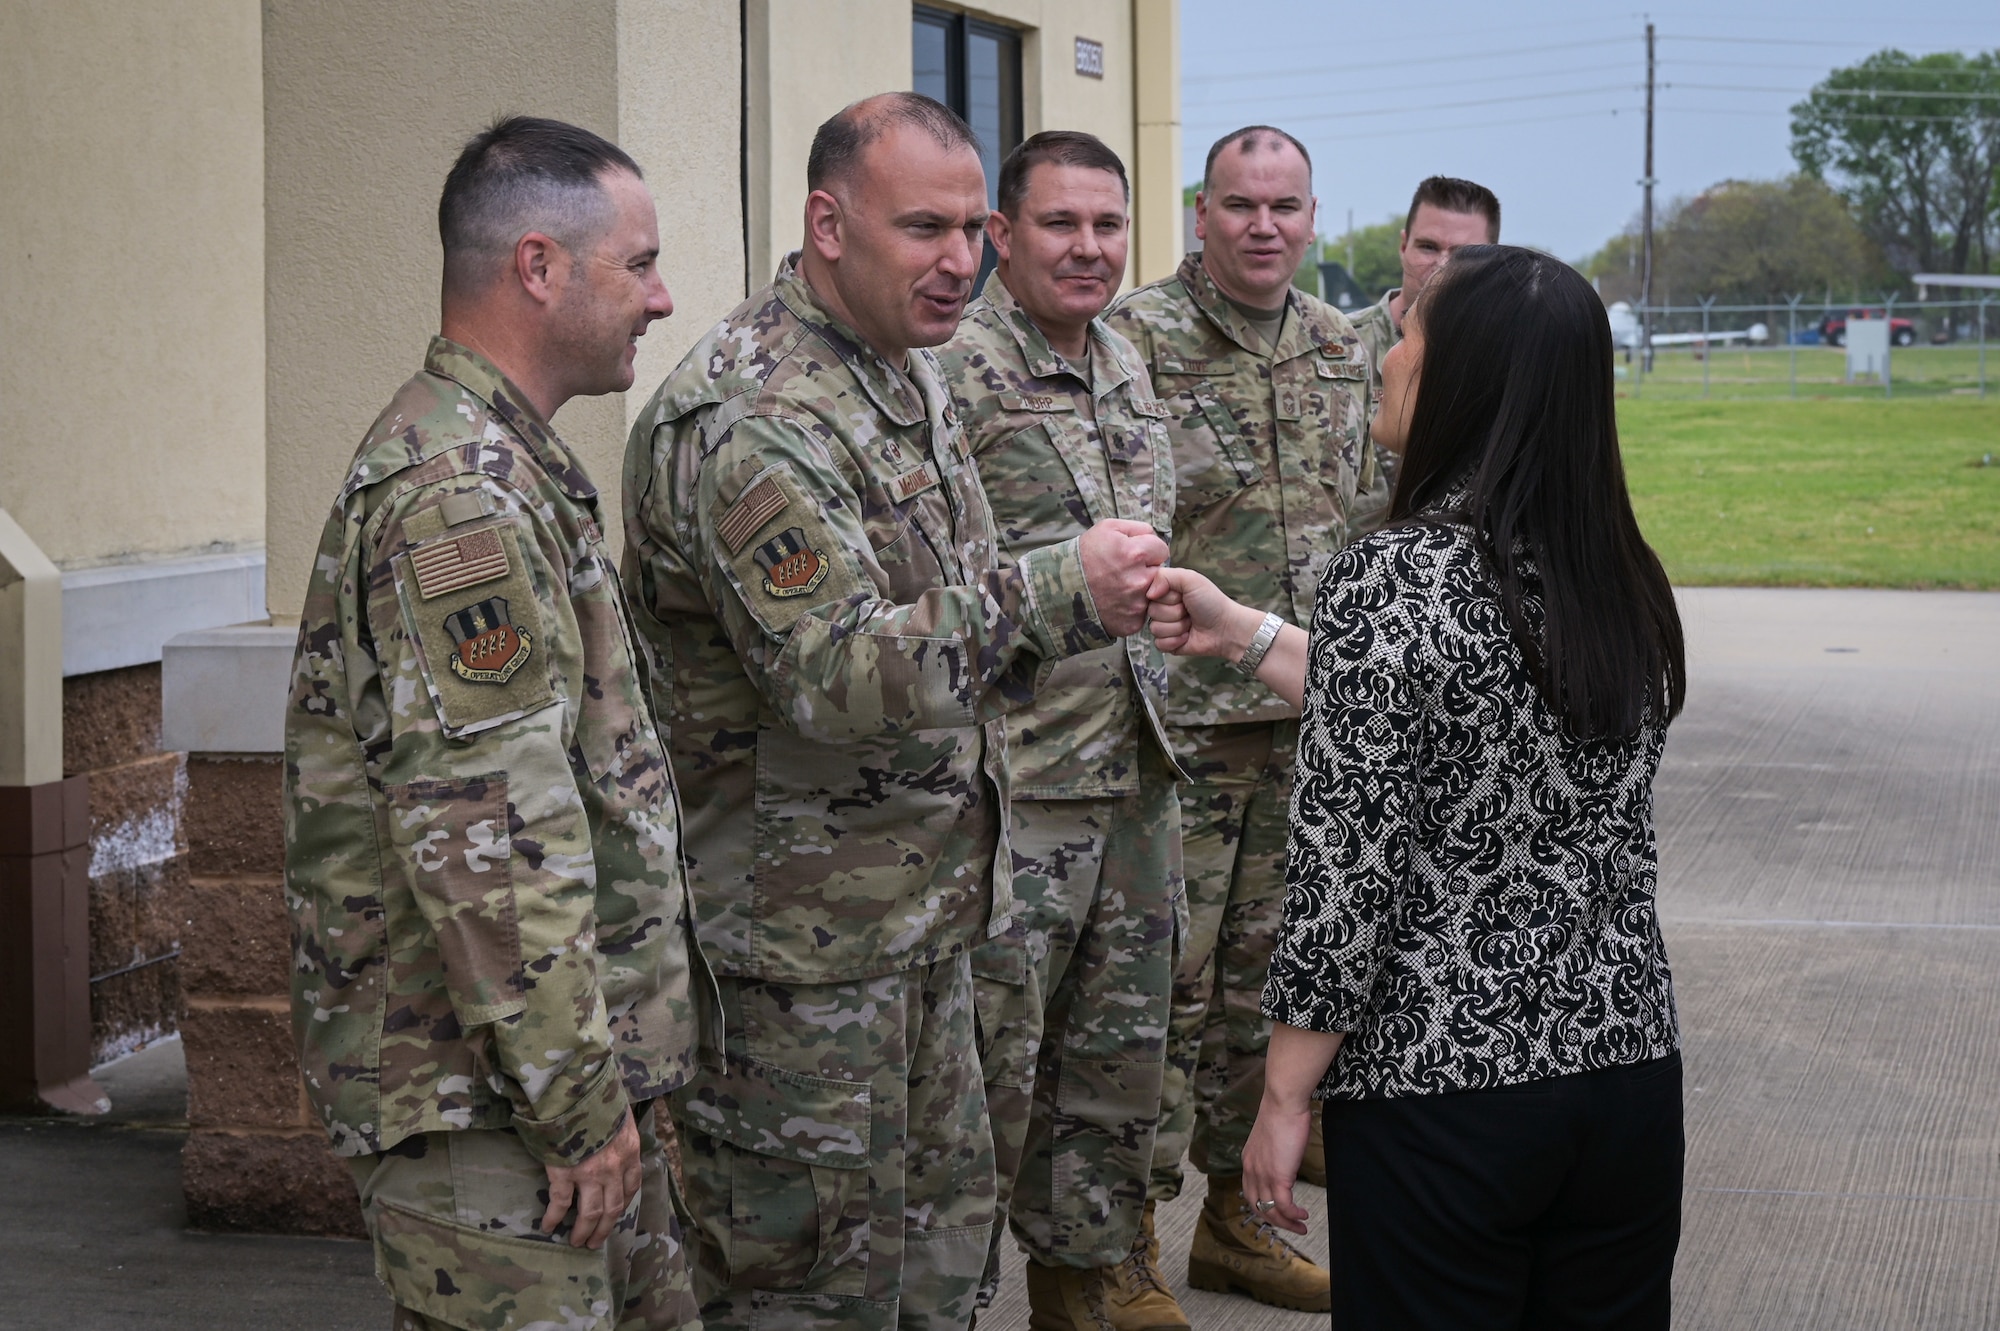 Leaders from 2nd Bomb Wing greet the Honorable Gina Ortiz Jones, Under Secretary of the Air Force, at the Tech Sgt. Joshua Kidd’s Weapons Load Training Facility during a visit to Barksdale Air Force Base, Louisiana, April 12, 2022. Tech Sgt. Joshua Kidd’s Weapons Load Training Facility was named after Tech. Kidd, a 2nd Maintenance Group, loading standardization crew chief who was shot and killed outside of his house in Bossier City, Louisiana. (U.S. Air Force photo by Senior Airman Jonathan E. Ramos)